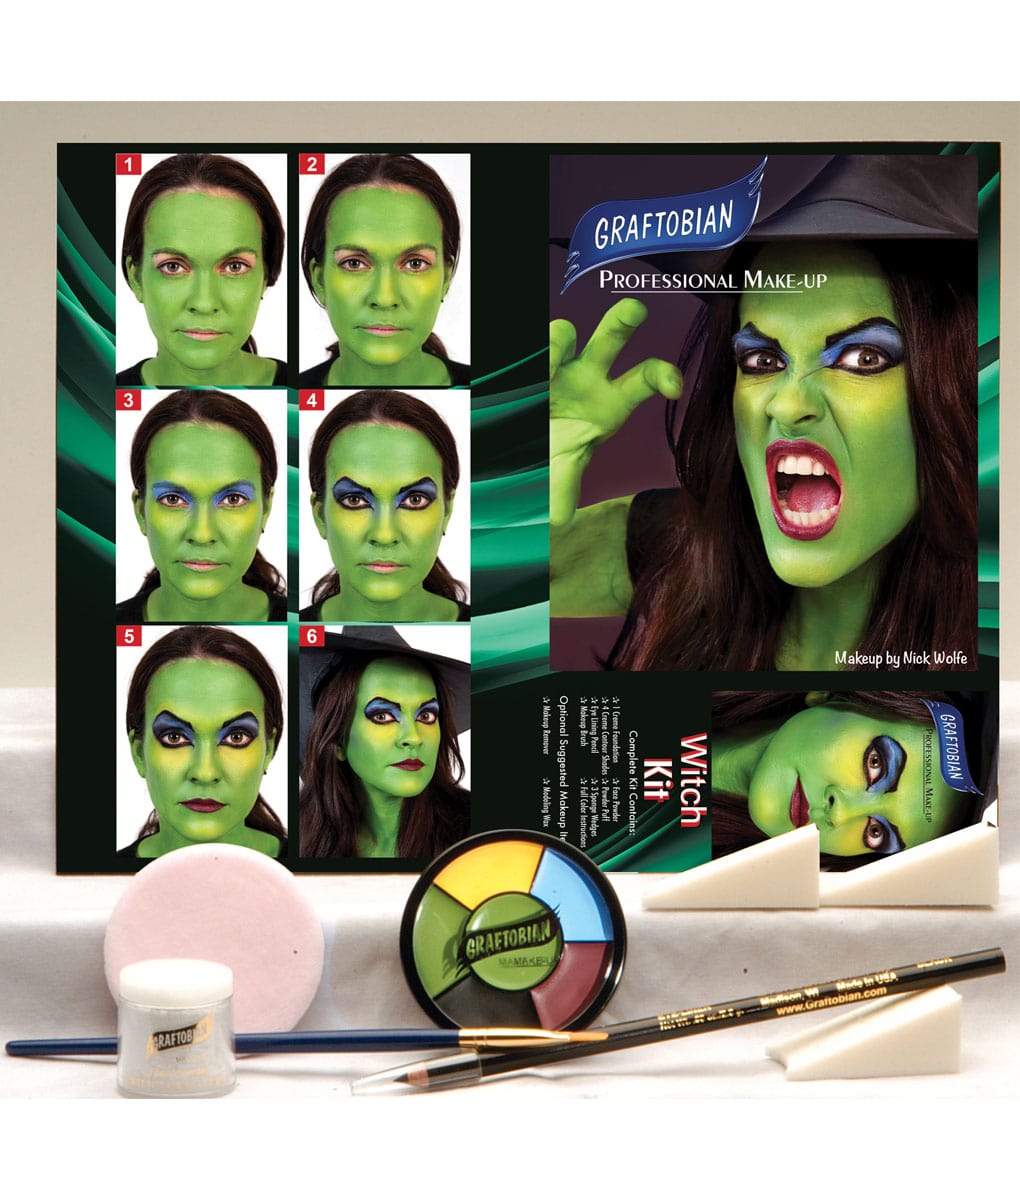  Graftobian Special FX Trauma Pro SFX Makeup Kit - Professional Makeup  Kit for Halloween, Cosplay, and Movie, Easy-to-use Cosmetics Collection Set  for Beginners, Complete Special Effects Makeup Kit : Beauty